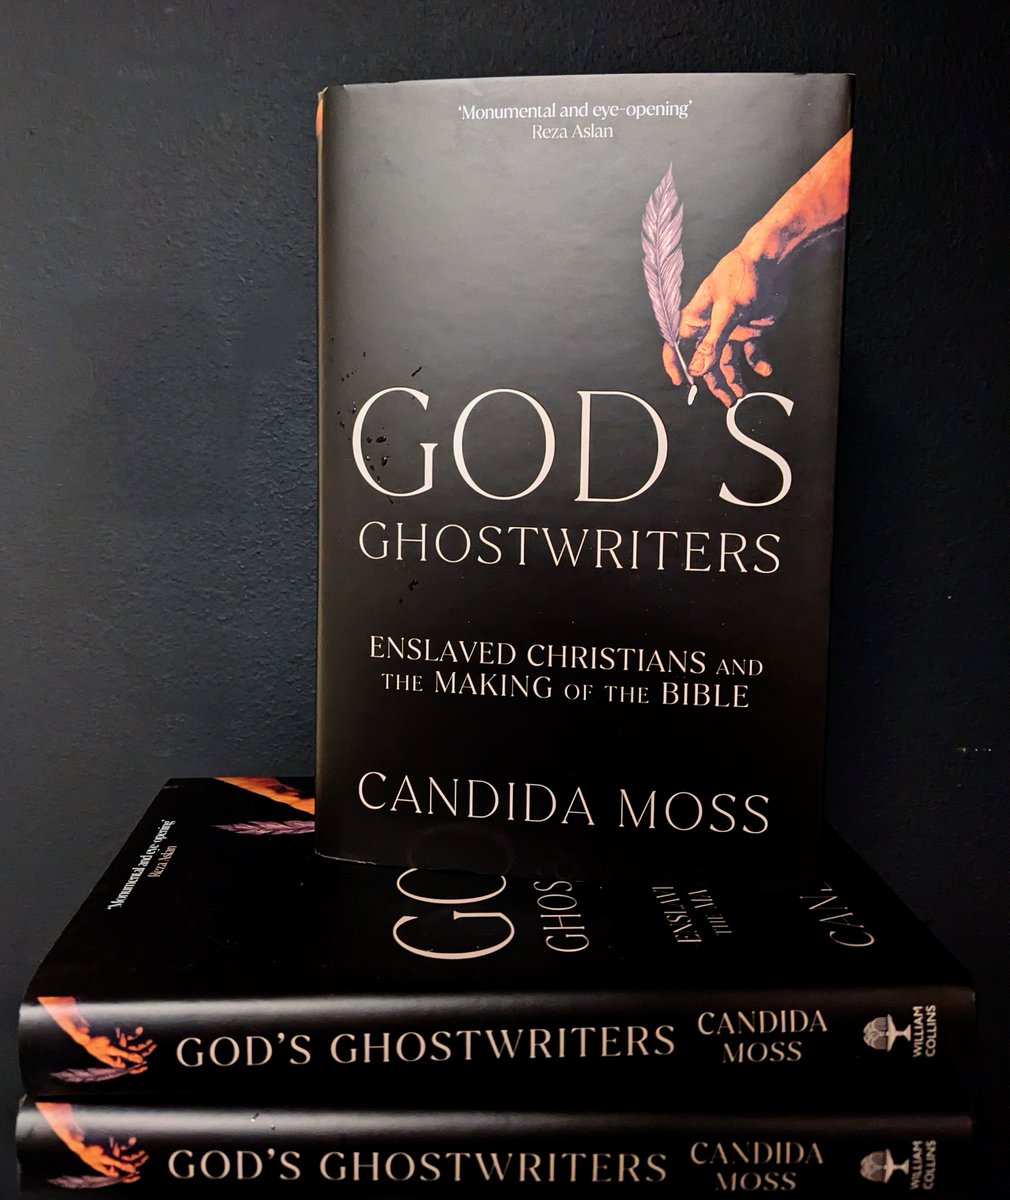 It's great to have copies of #GodsGhostwriters: Enslaved Christians and the Making of the Bible by @candidamoss thanks to @WmCollinsBooks 📚🥳

Get your copy here👇
tinyurl.com/44ejm4a4

#theology #nonfiction